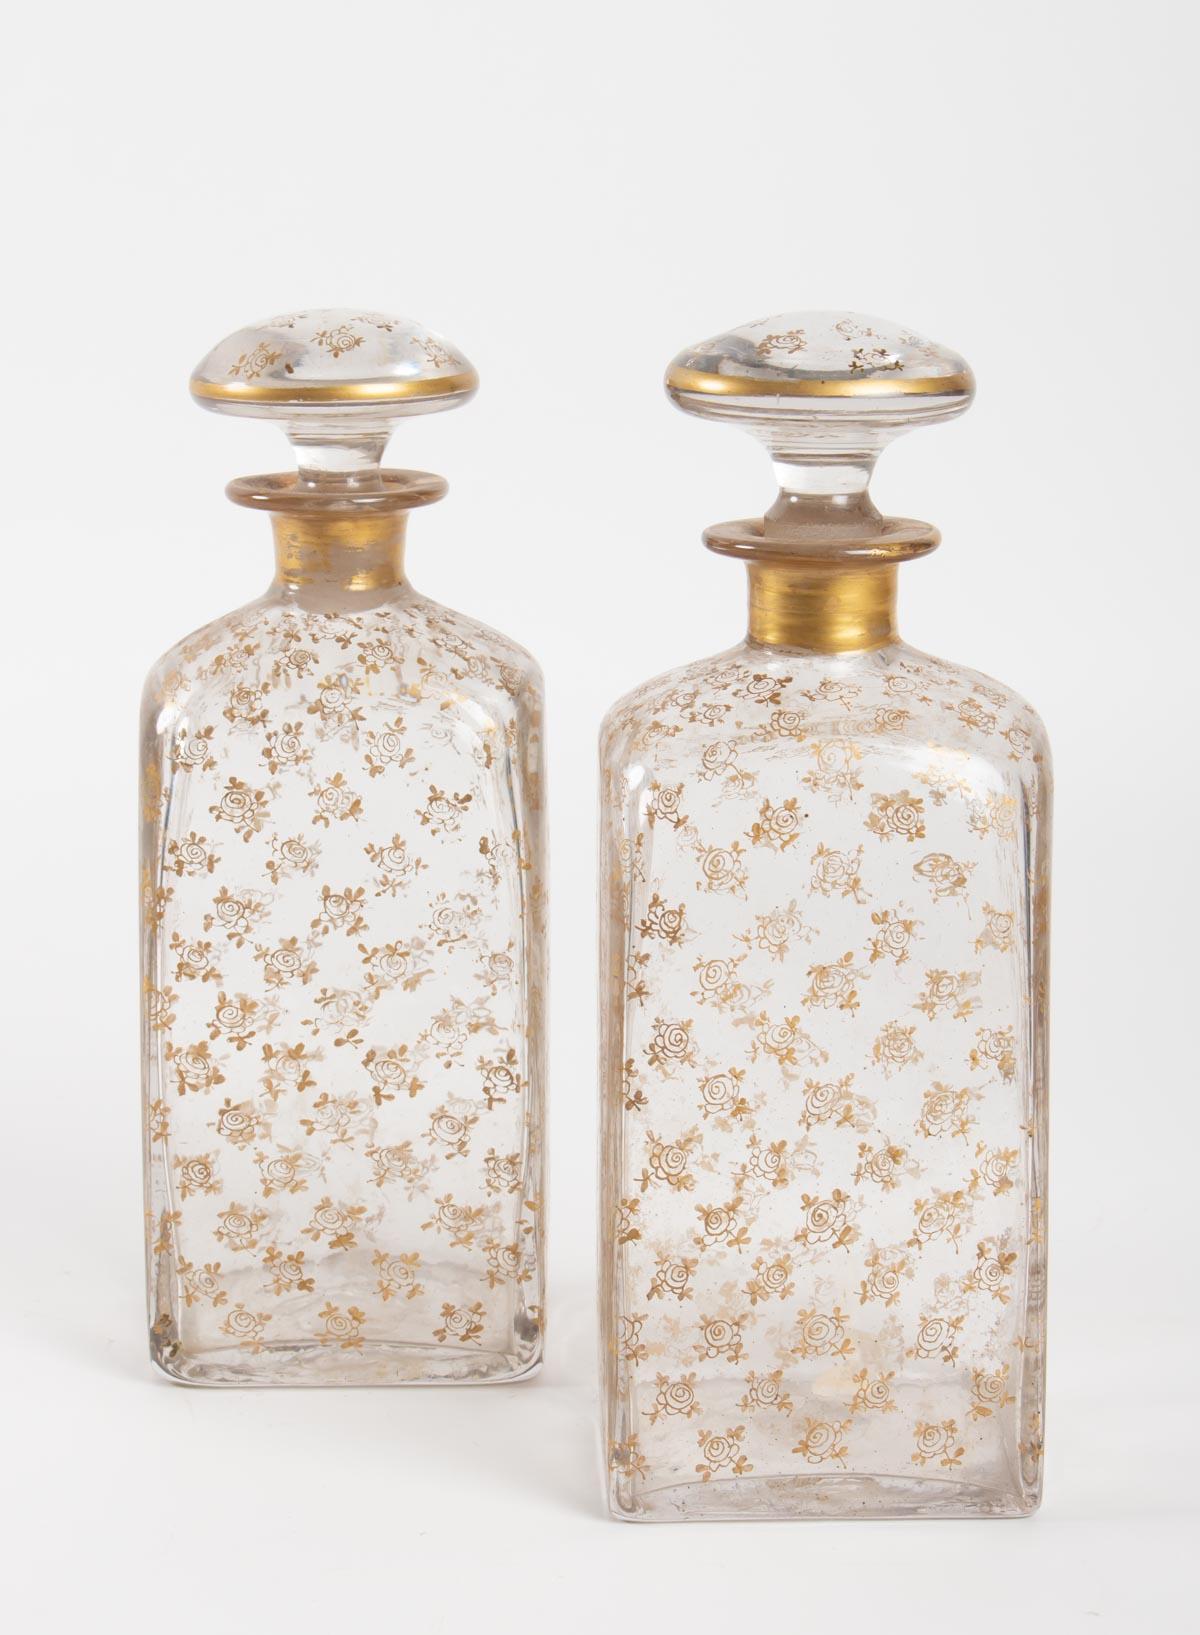 Pair of glass carafes, decorated with golden patterns, Louis Philippe period, 1840-1850
Measures: H 26cm, W 10cm, W 8cm.